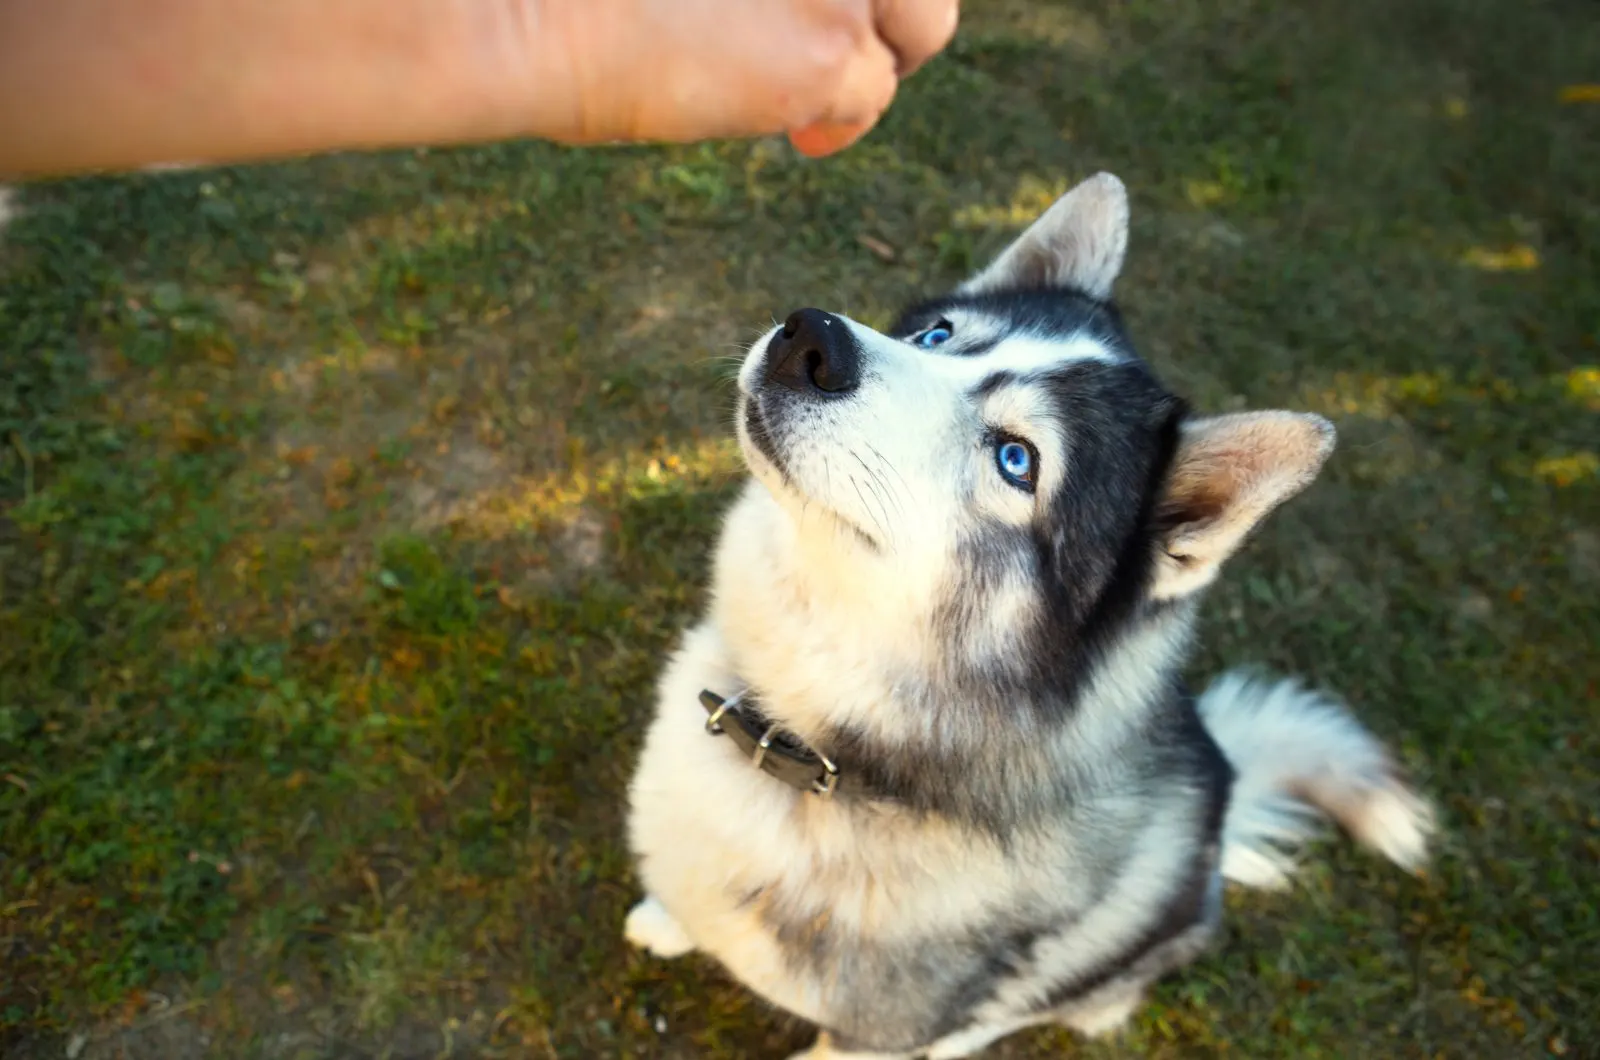 husky waiting for his treat